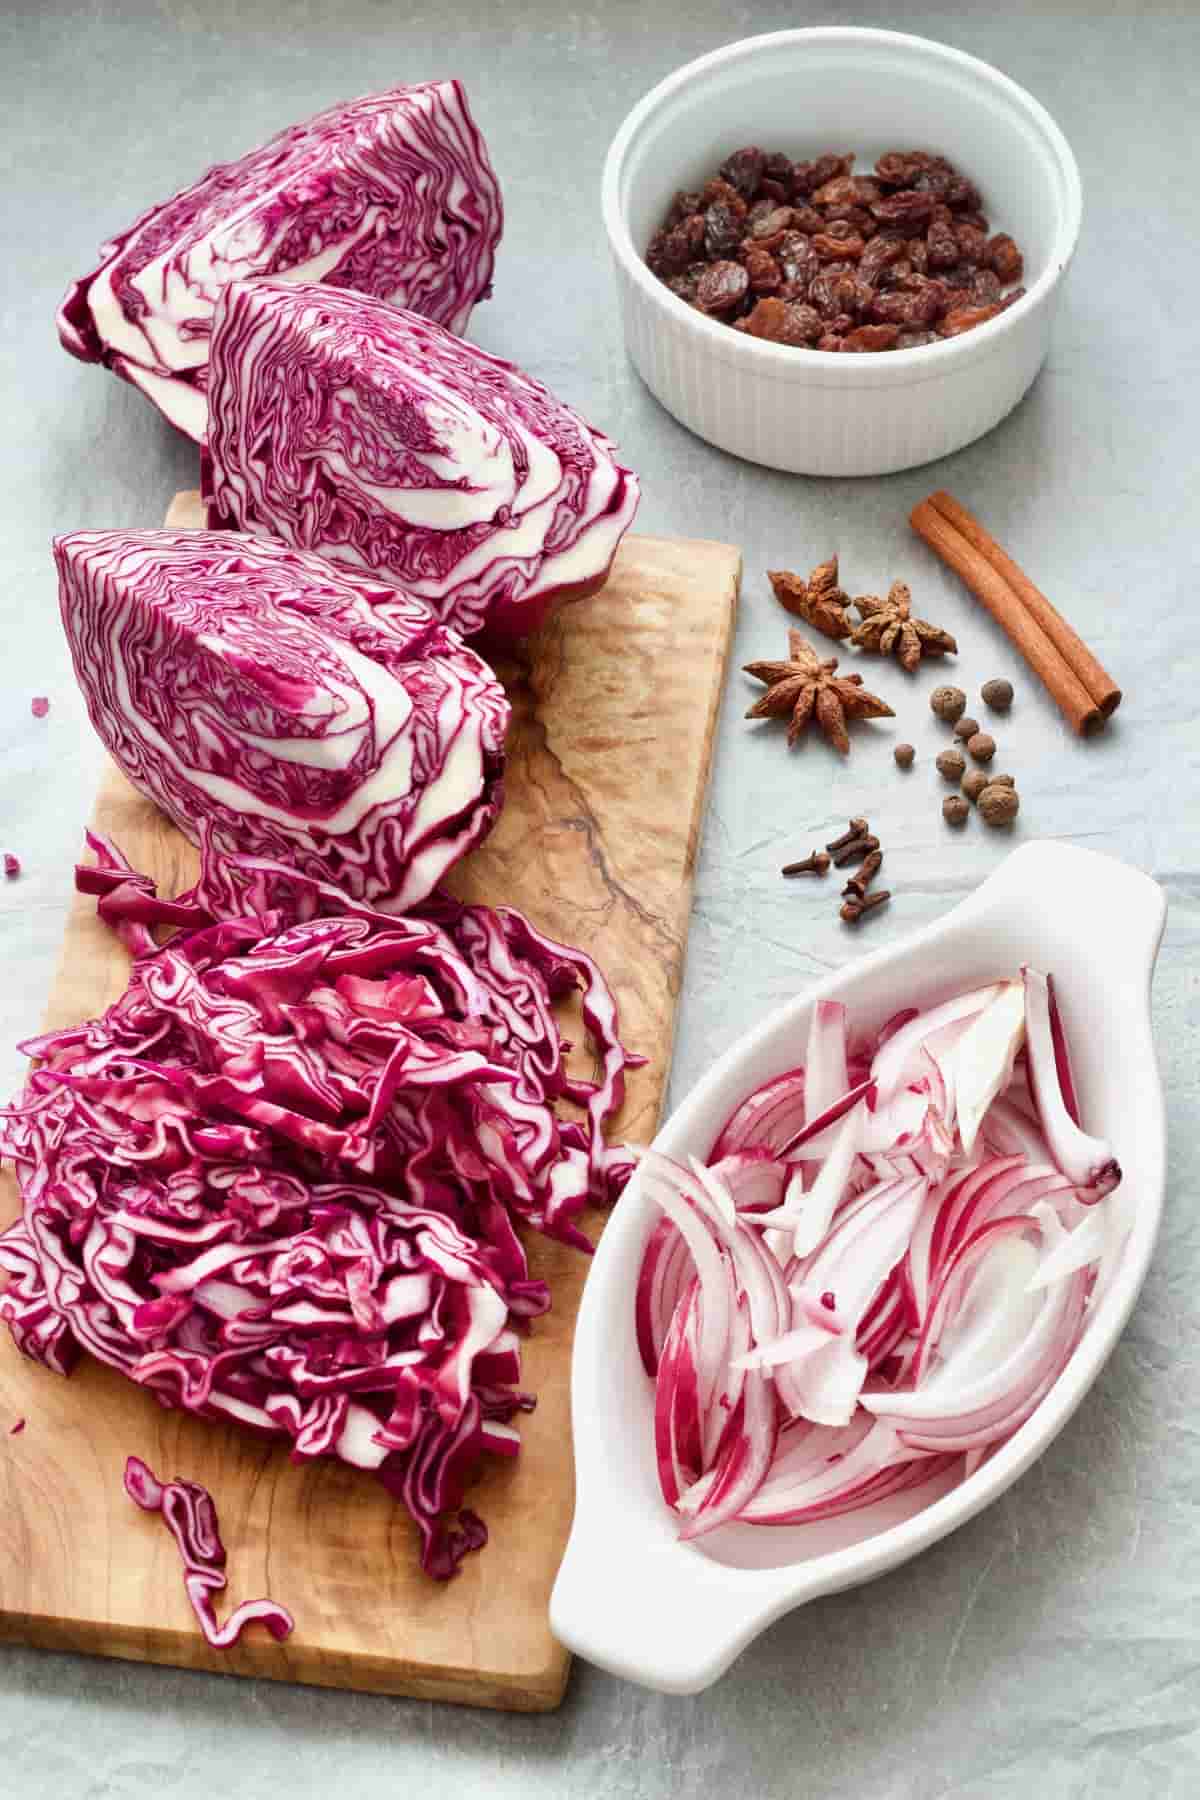 Red cabbage, raisins, red onion and spices.